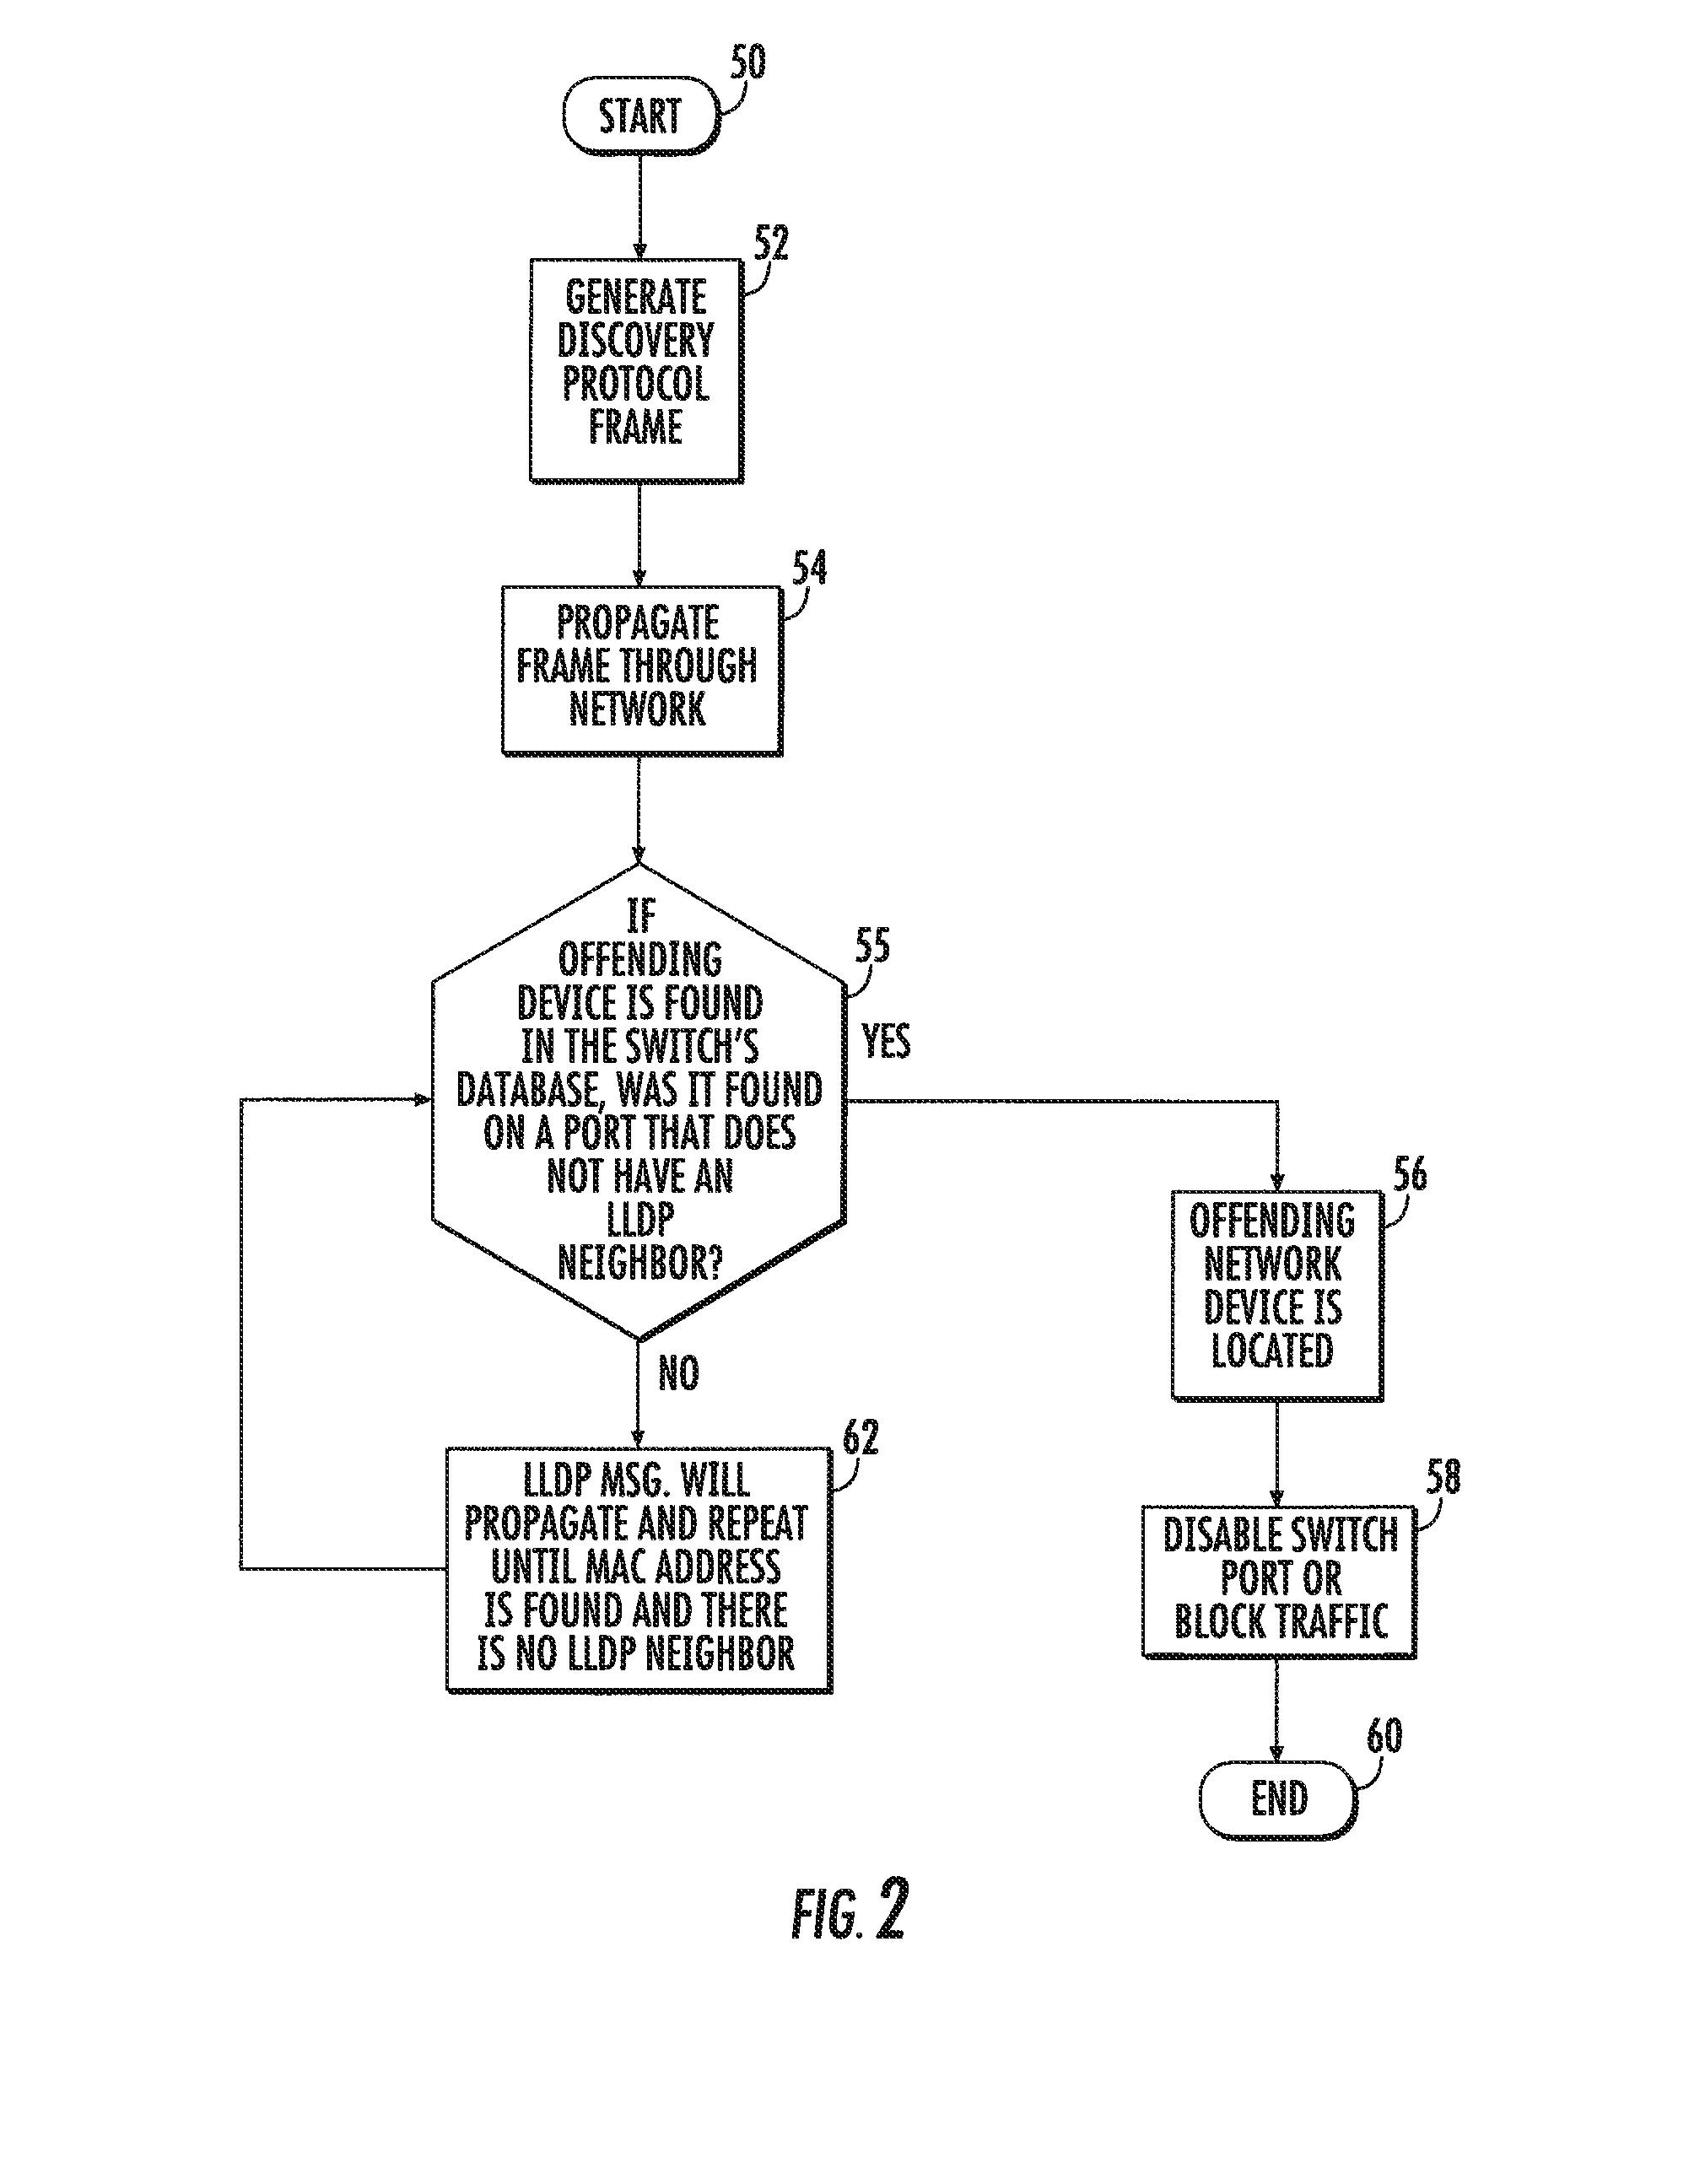 System and method for locating offending network device and maintaining network integrity